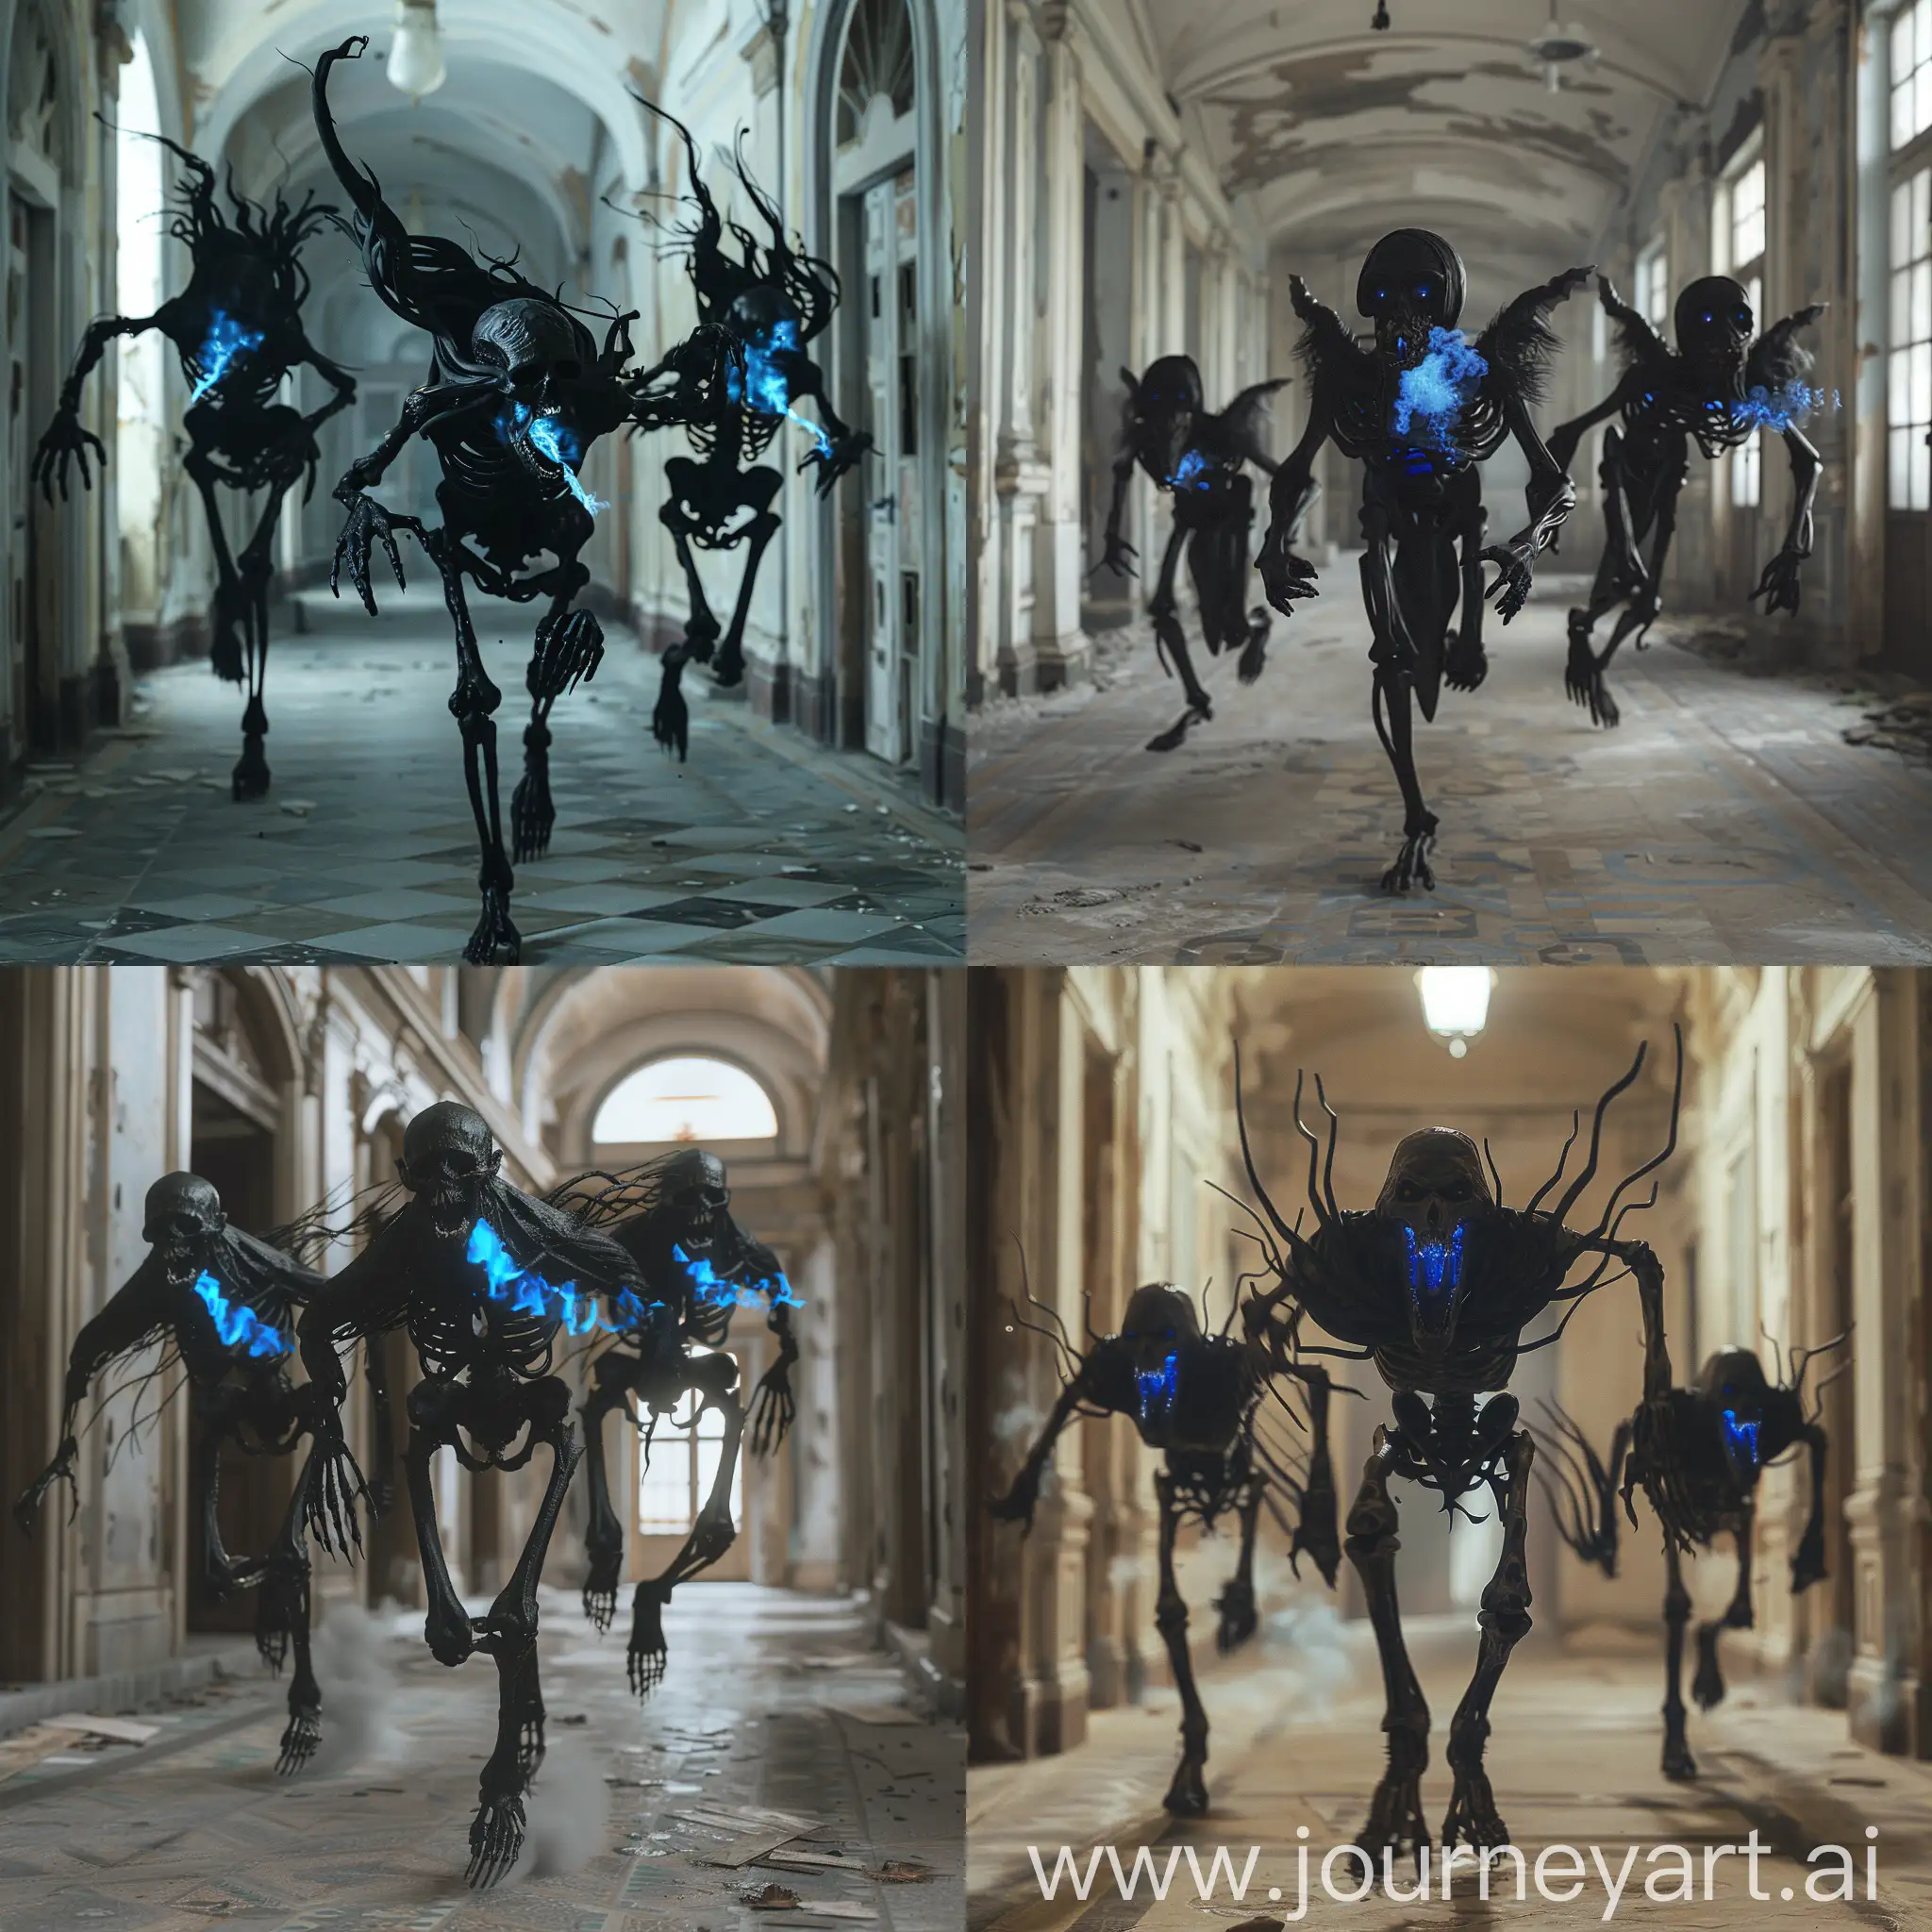 An epic scene, three black creatures, skin-covered skeletons, long arms, black skulls, long ears, blue fire in their mouths and eyes, run down the corridor, in an old abandoned building, hyper-realism, 8K image quality, ultra detail 